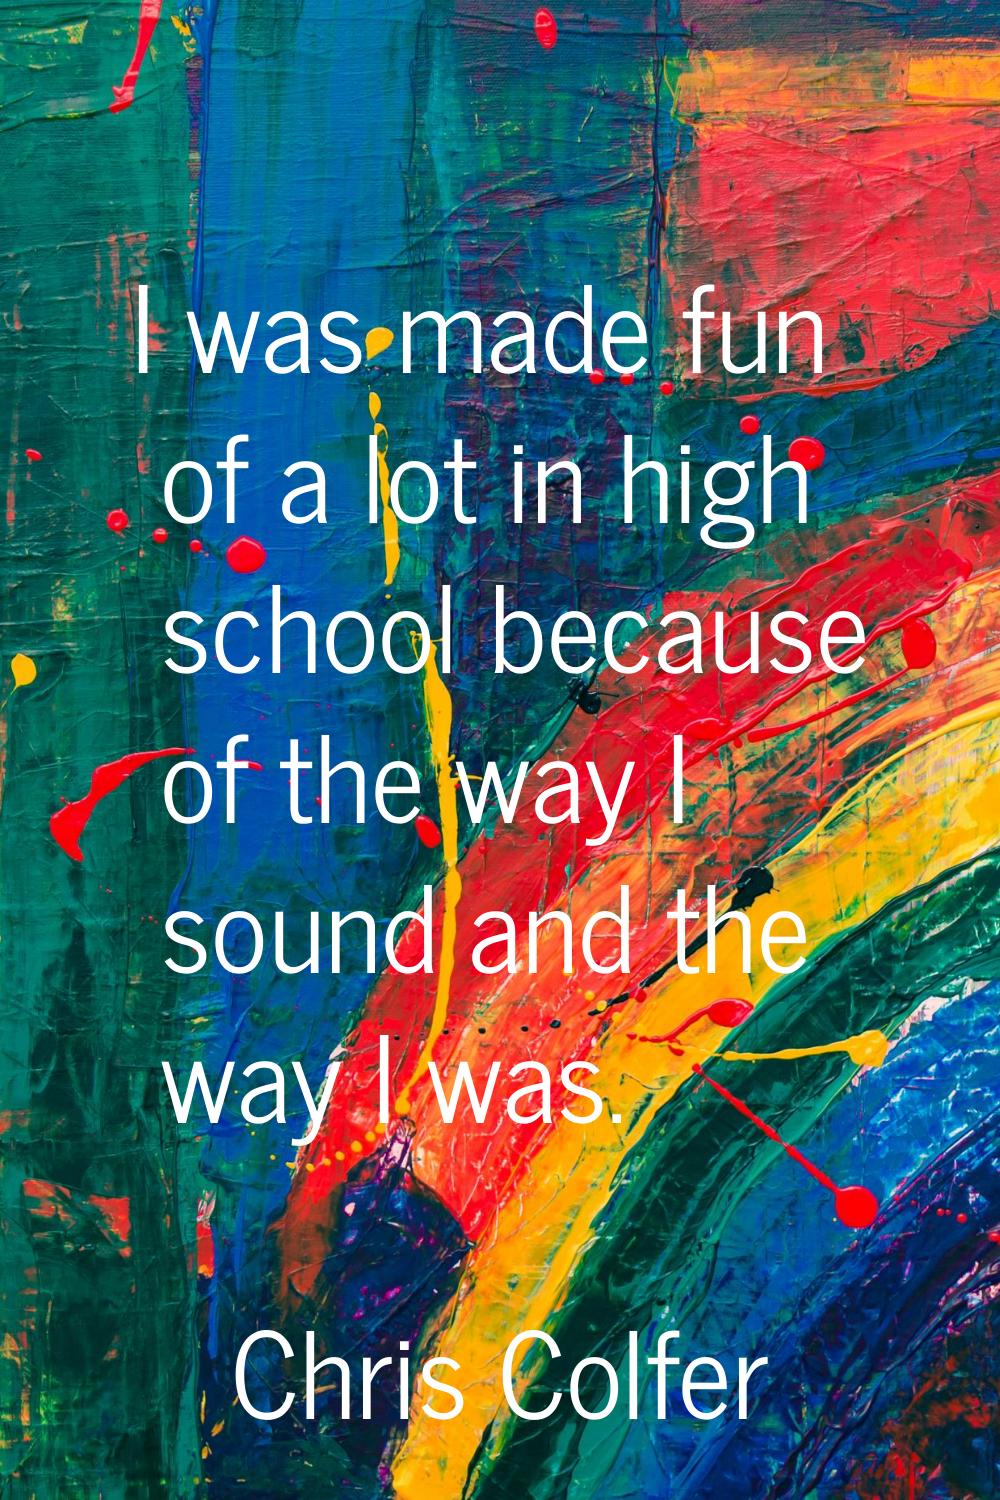 I was made fun of a lot in high school because of the way I sound and the way I was.